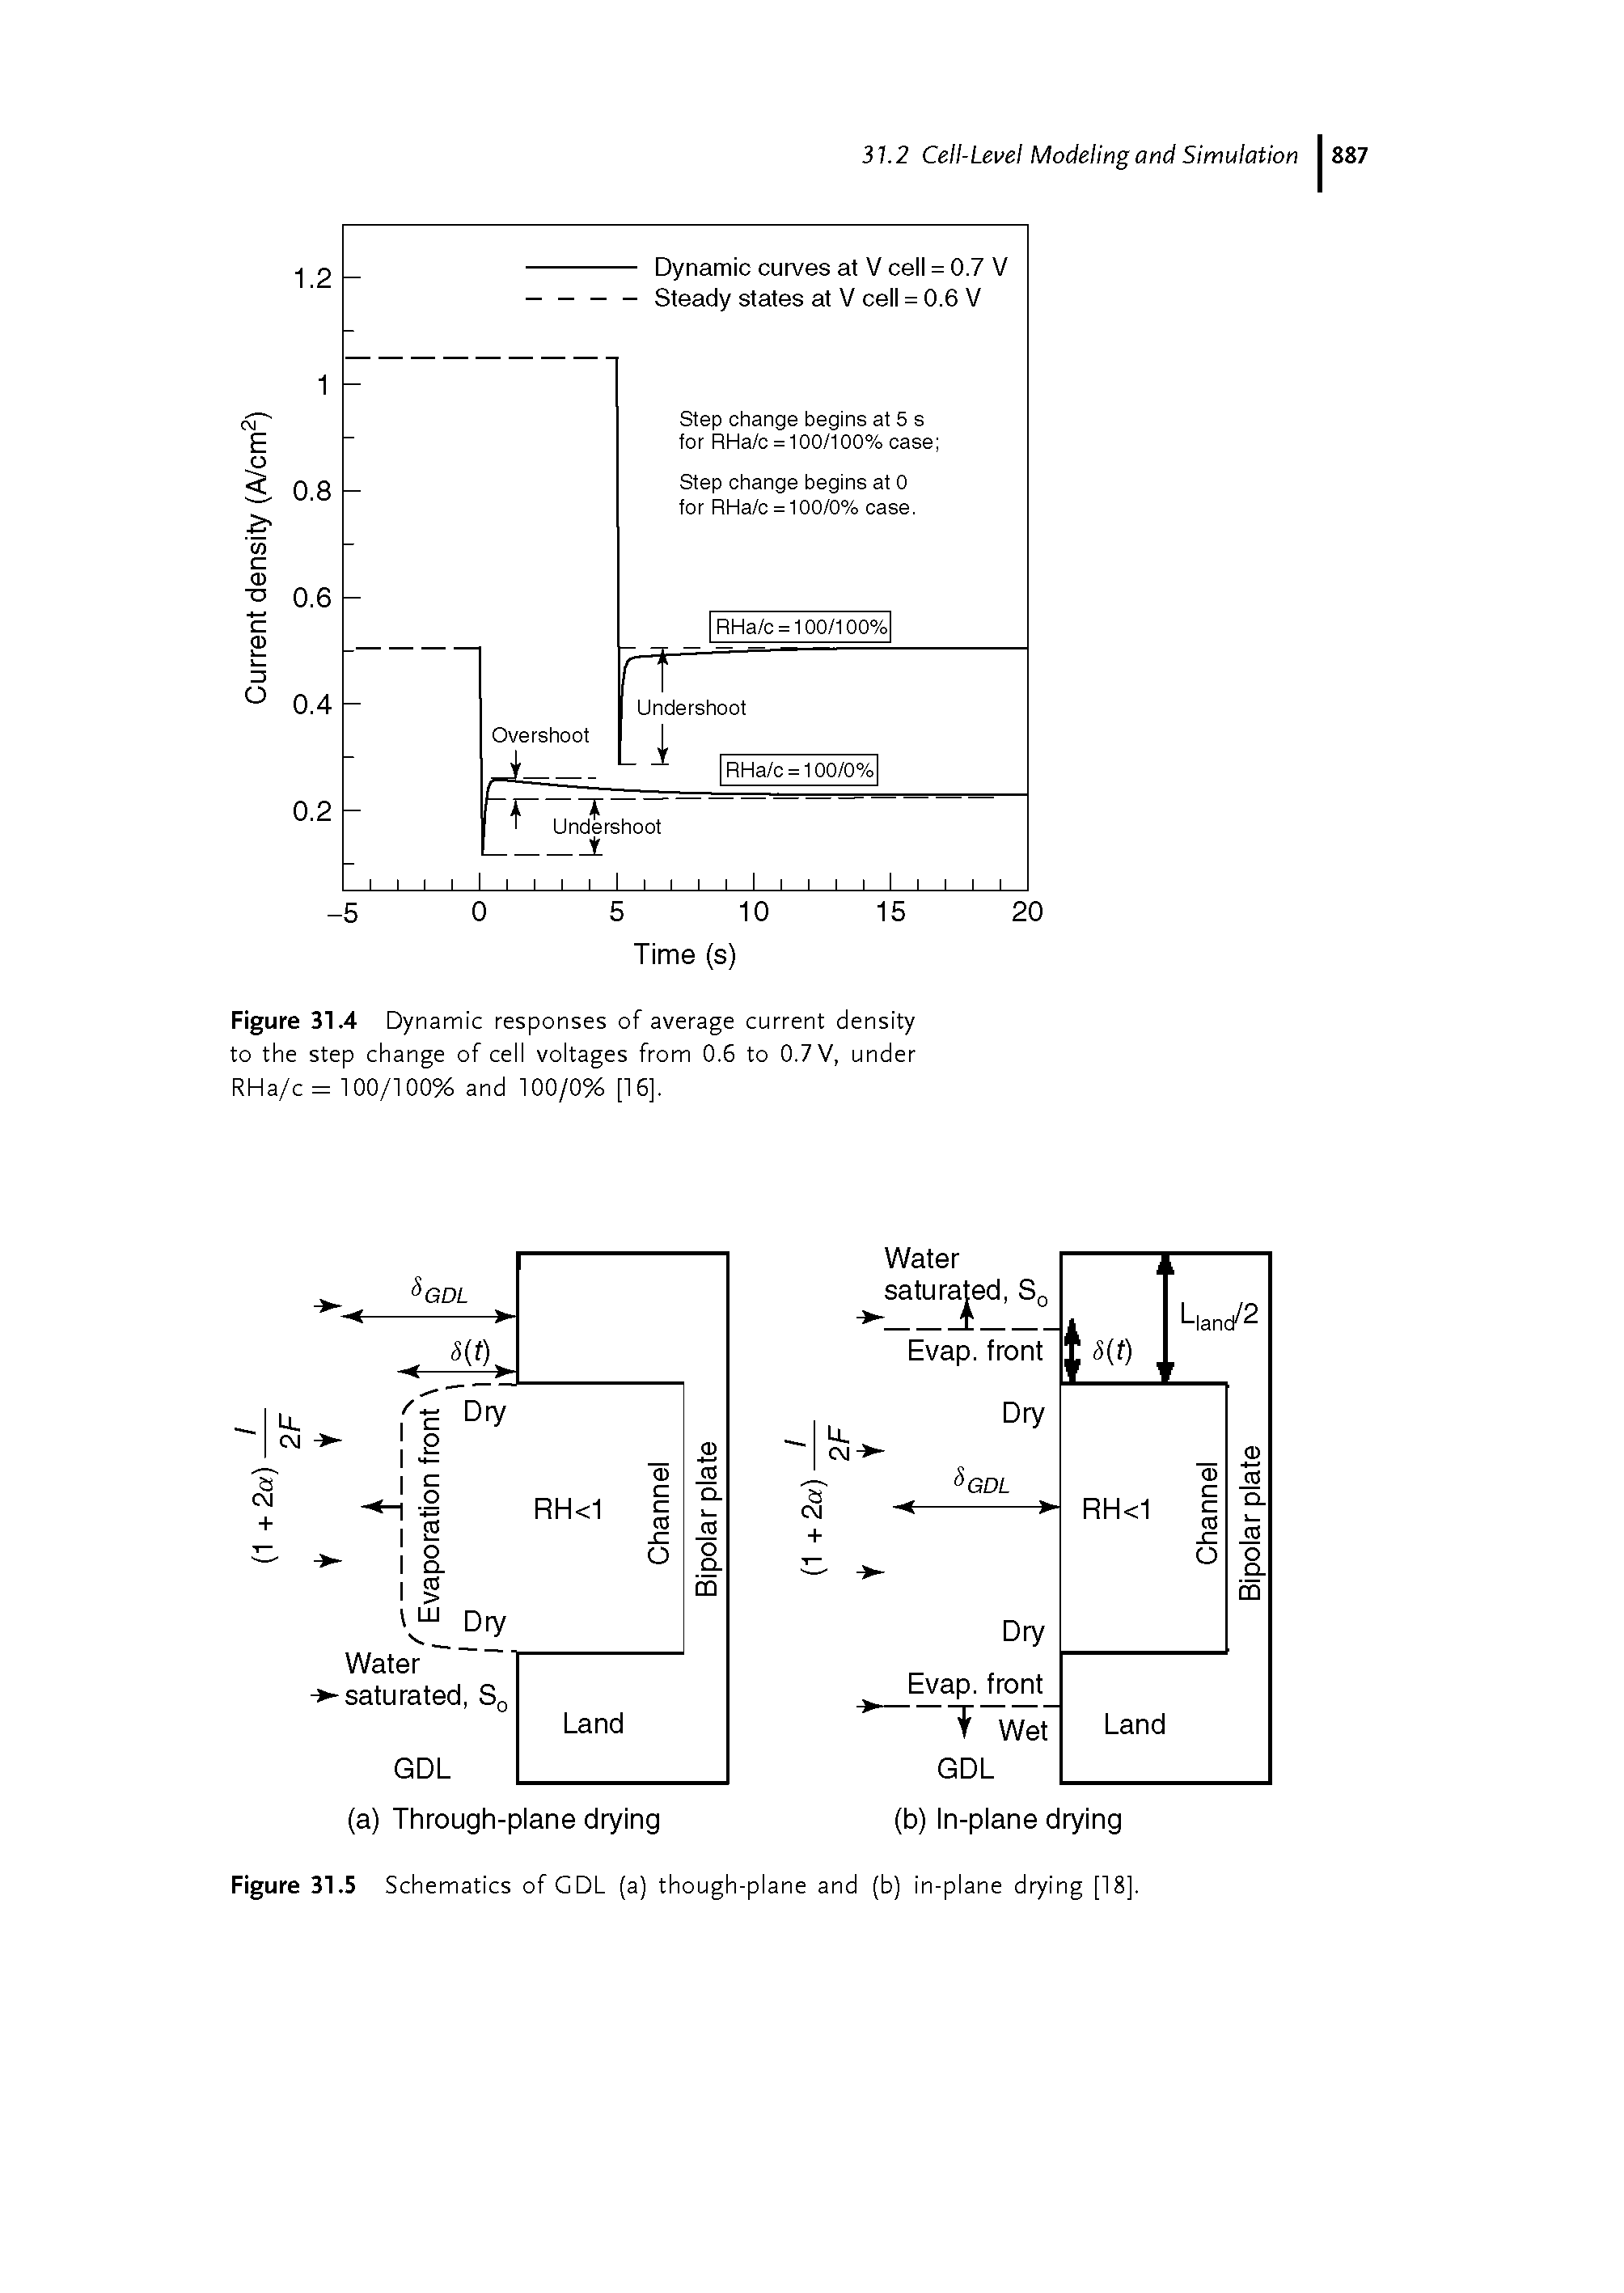 Figure 31.5 Schematics of GDL (a) though-plane and (b) in-plane drying [18].